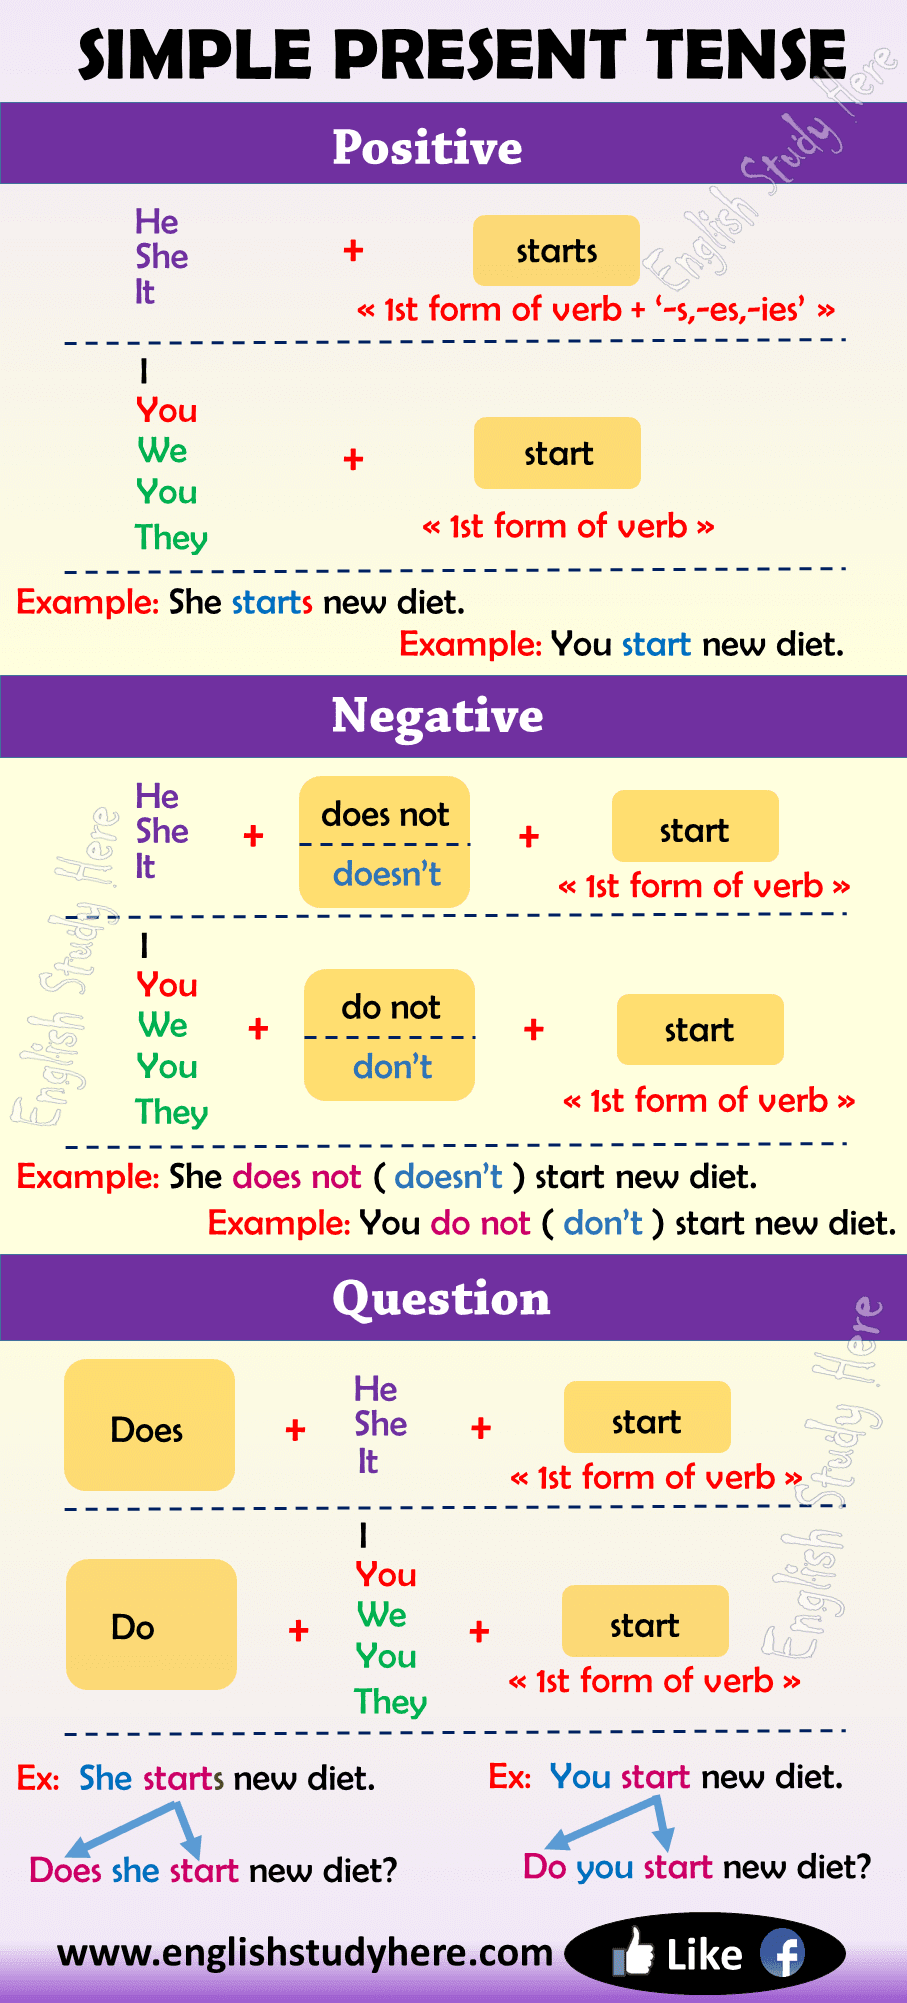 Let's see if you find: Simple Present Tense In English English Study Here